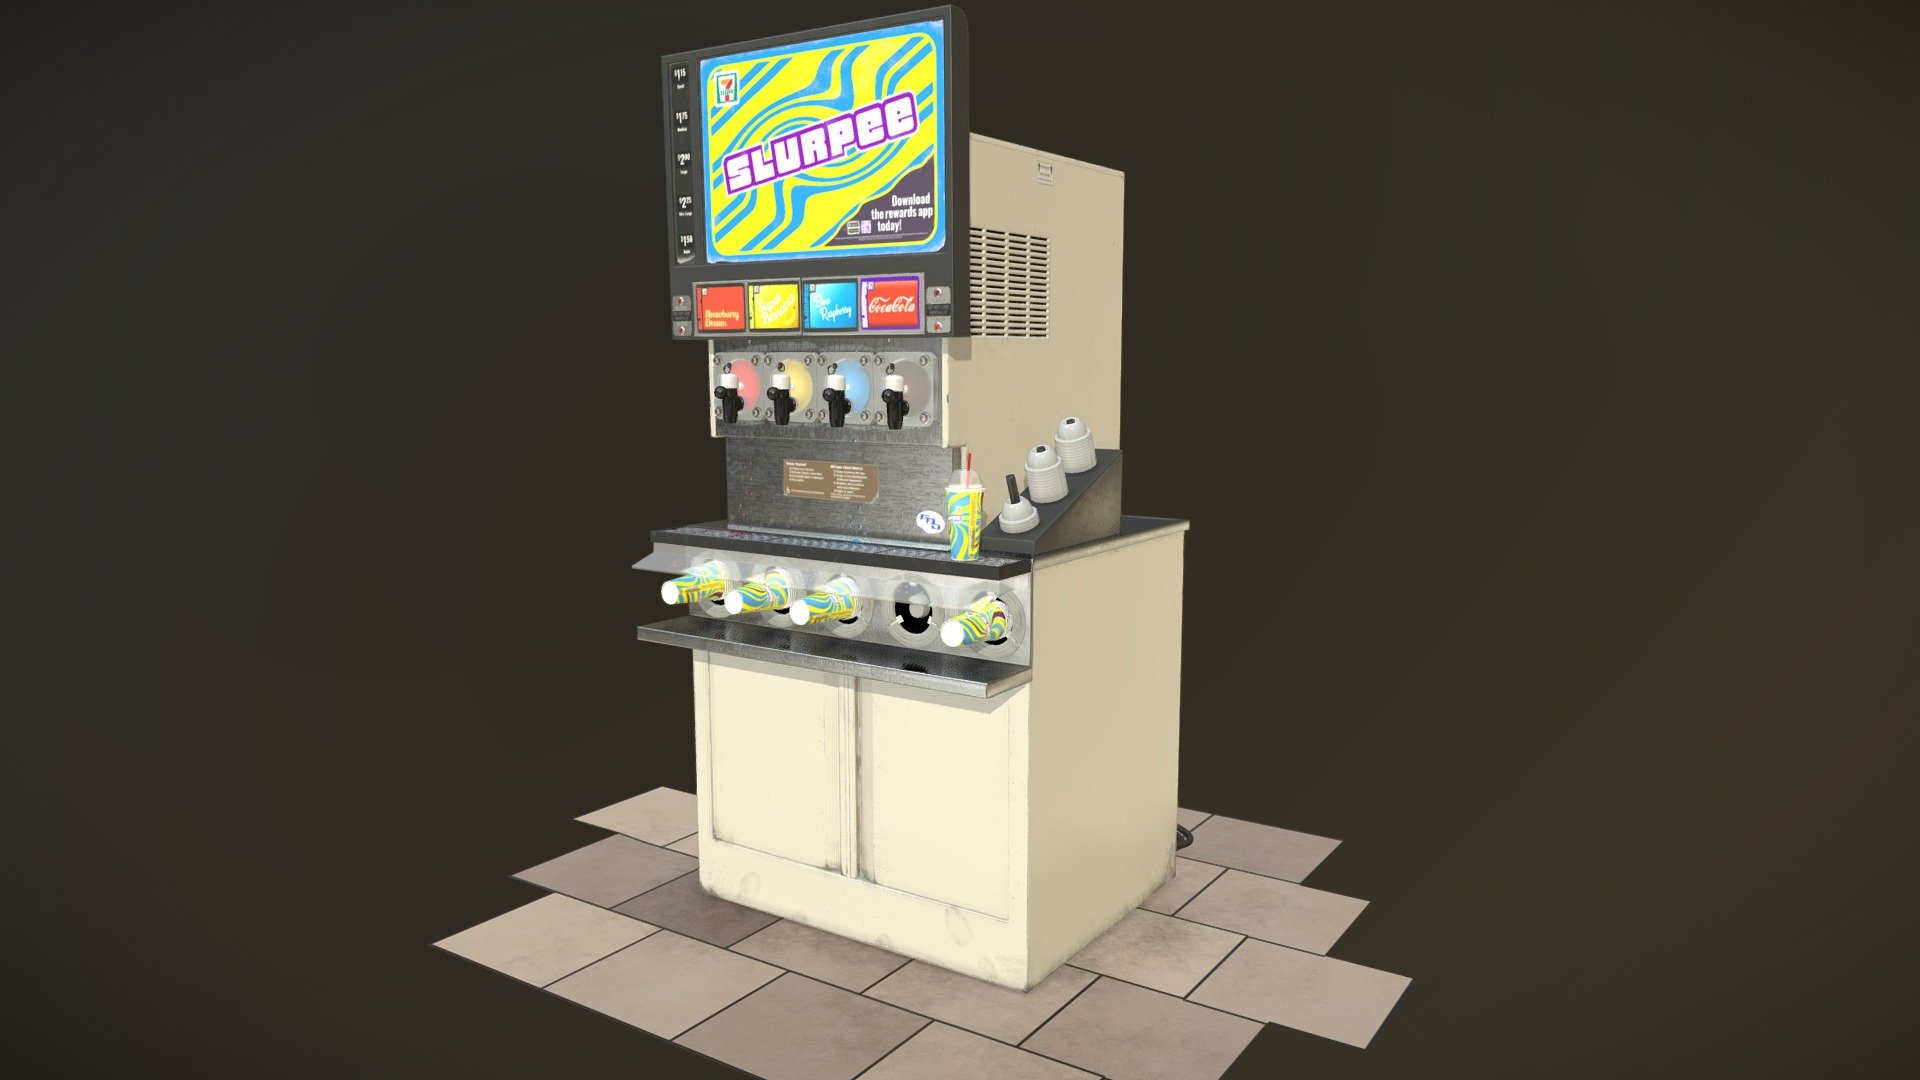 Realtime replica of a Slurpee Machine. The silly thing that started it all, this model is a passionate re-do of the first model I ever made. I decided to stuff in as many details as I possibly could since this one is very special to me. &lt;3
https://www.artstation.com/artwork/o2KRLW

Modeled in Blender and textured in Substance Painter.

I first discovered 3D art back in the summer of 2010 when I started making props for the game Garry's Mod while I was in middle school.

You can see a screenshot of the original below:

 - Slurpee Machine - 3D model by Olivia Sabatka (@discopears) 3d model